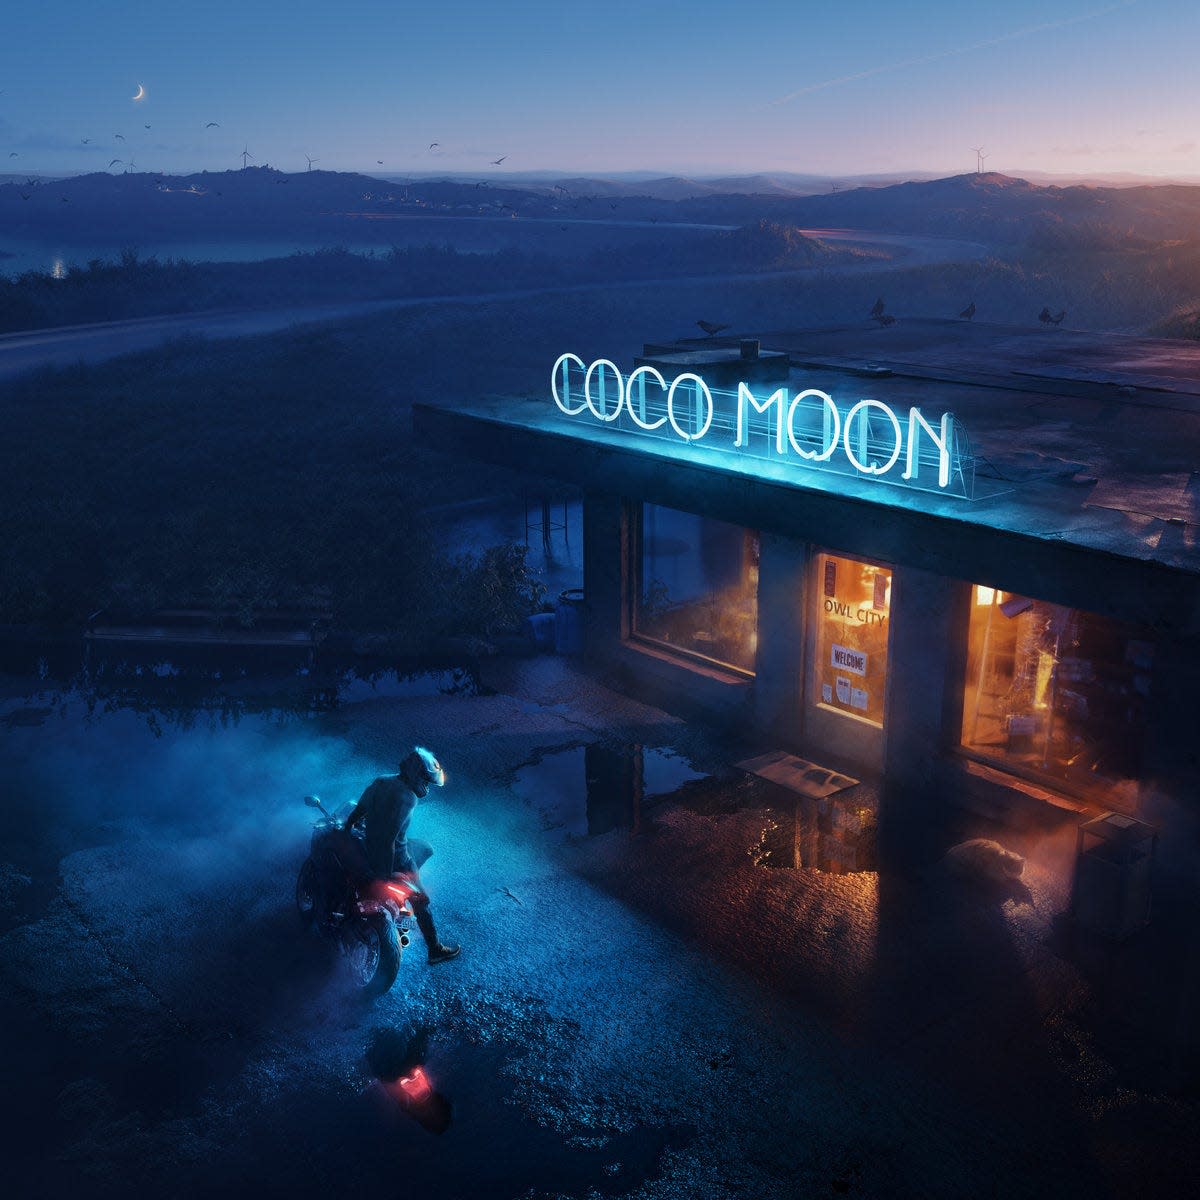 Cover art for "Coco Moon," Owl City's seventh studio album, released on Friday, March 24, 2023. "Dinosaur Park," the eighth track on the album, explicitly features the eponymous landmark on Skyline Drive in Rapid City, S.D.